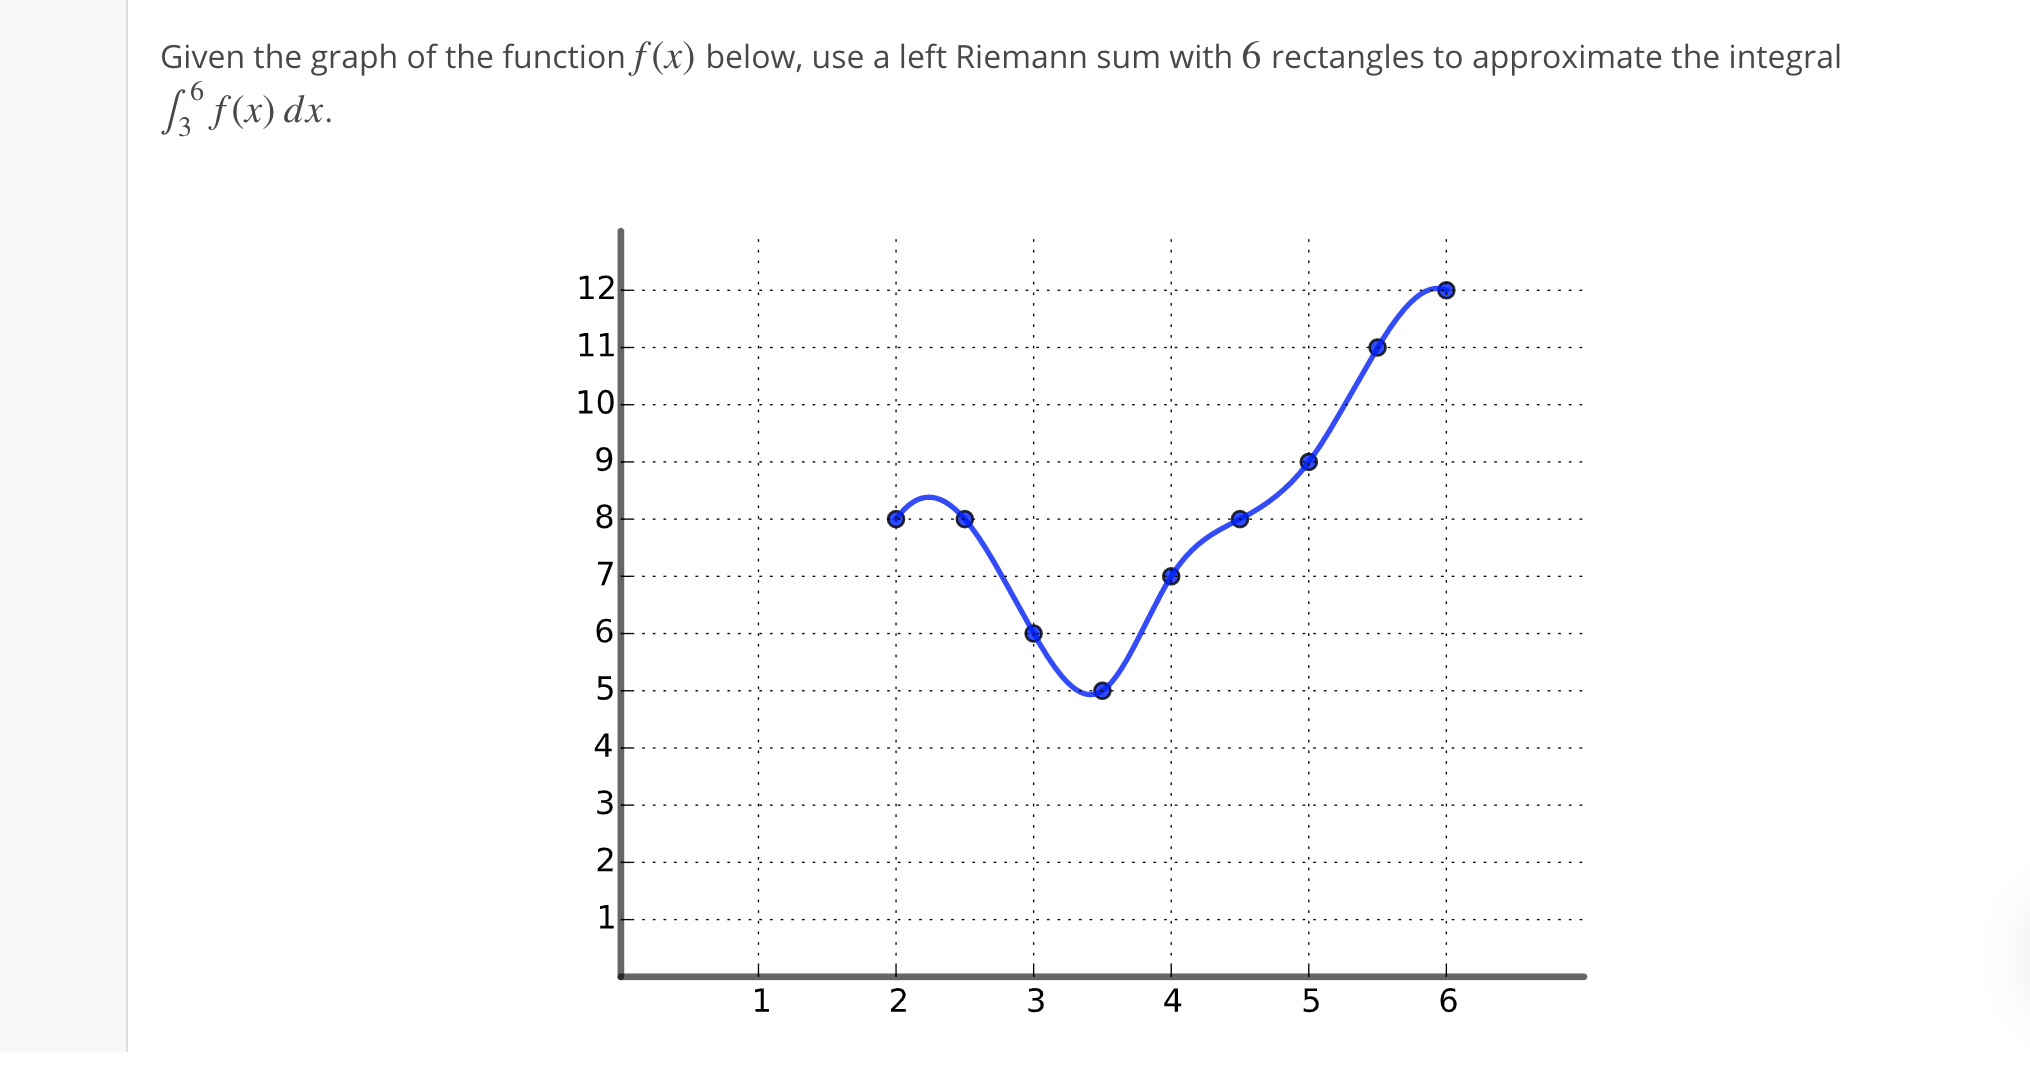 Given the graph of the function f(x) below, use a left Riemann sum with 6 rectangles to approximate the integral
S f(x) dx.
12
11
10
8
3
2
3
4
6.
LO
LO
